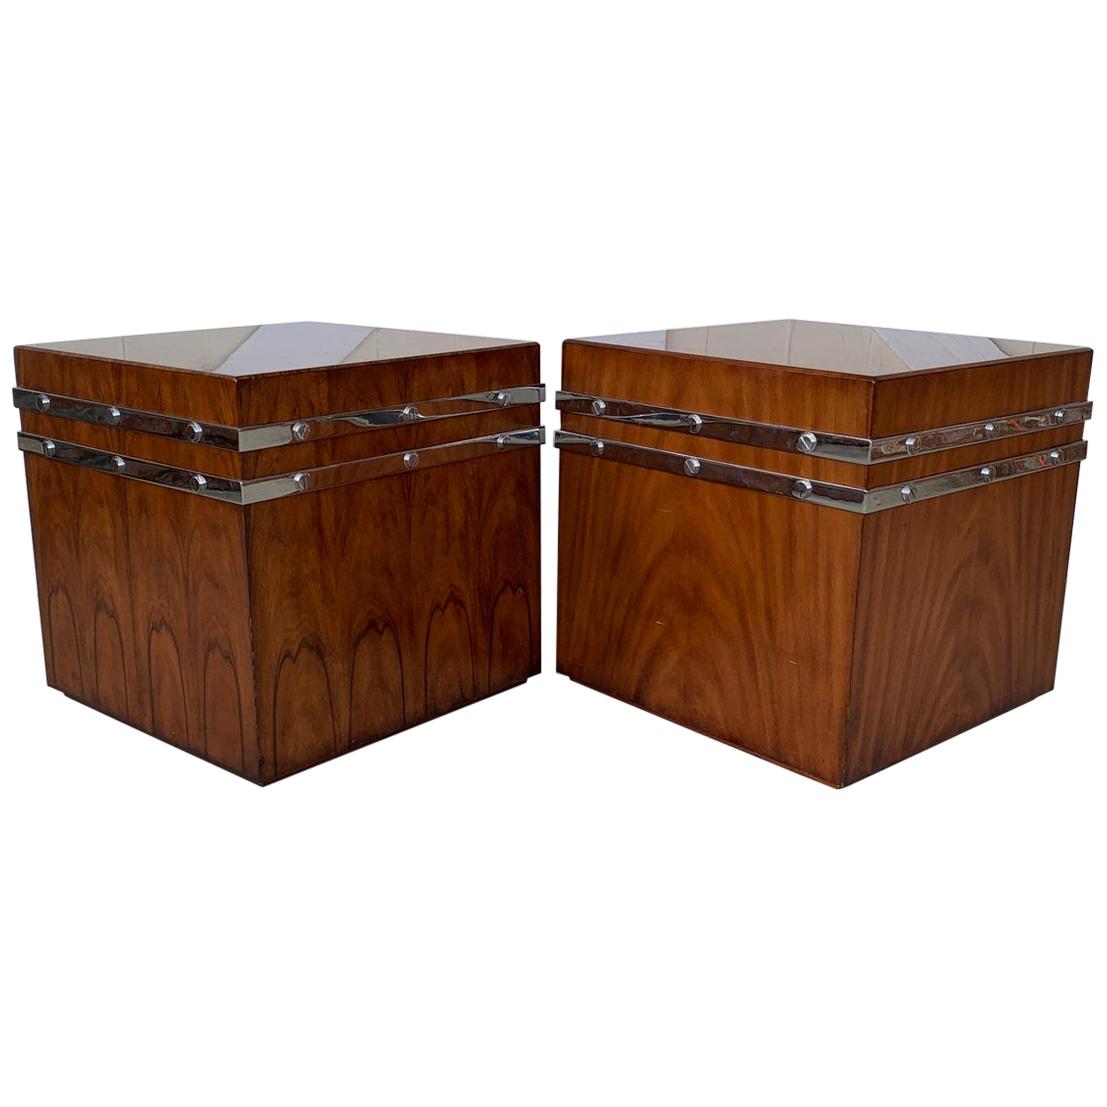 Pair of Large Cube Tables/Cabinets by Theodore Alexander